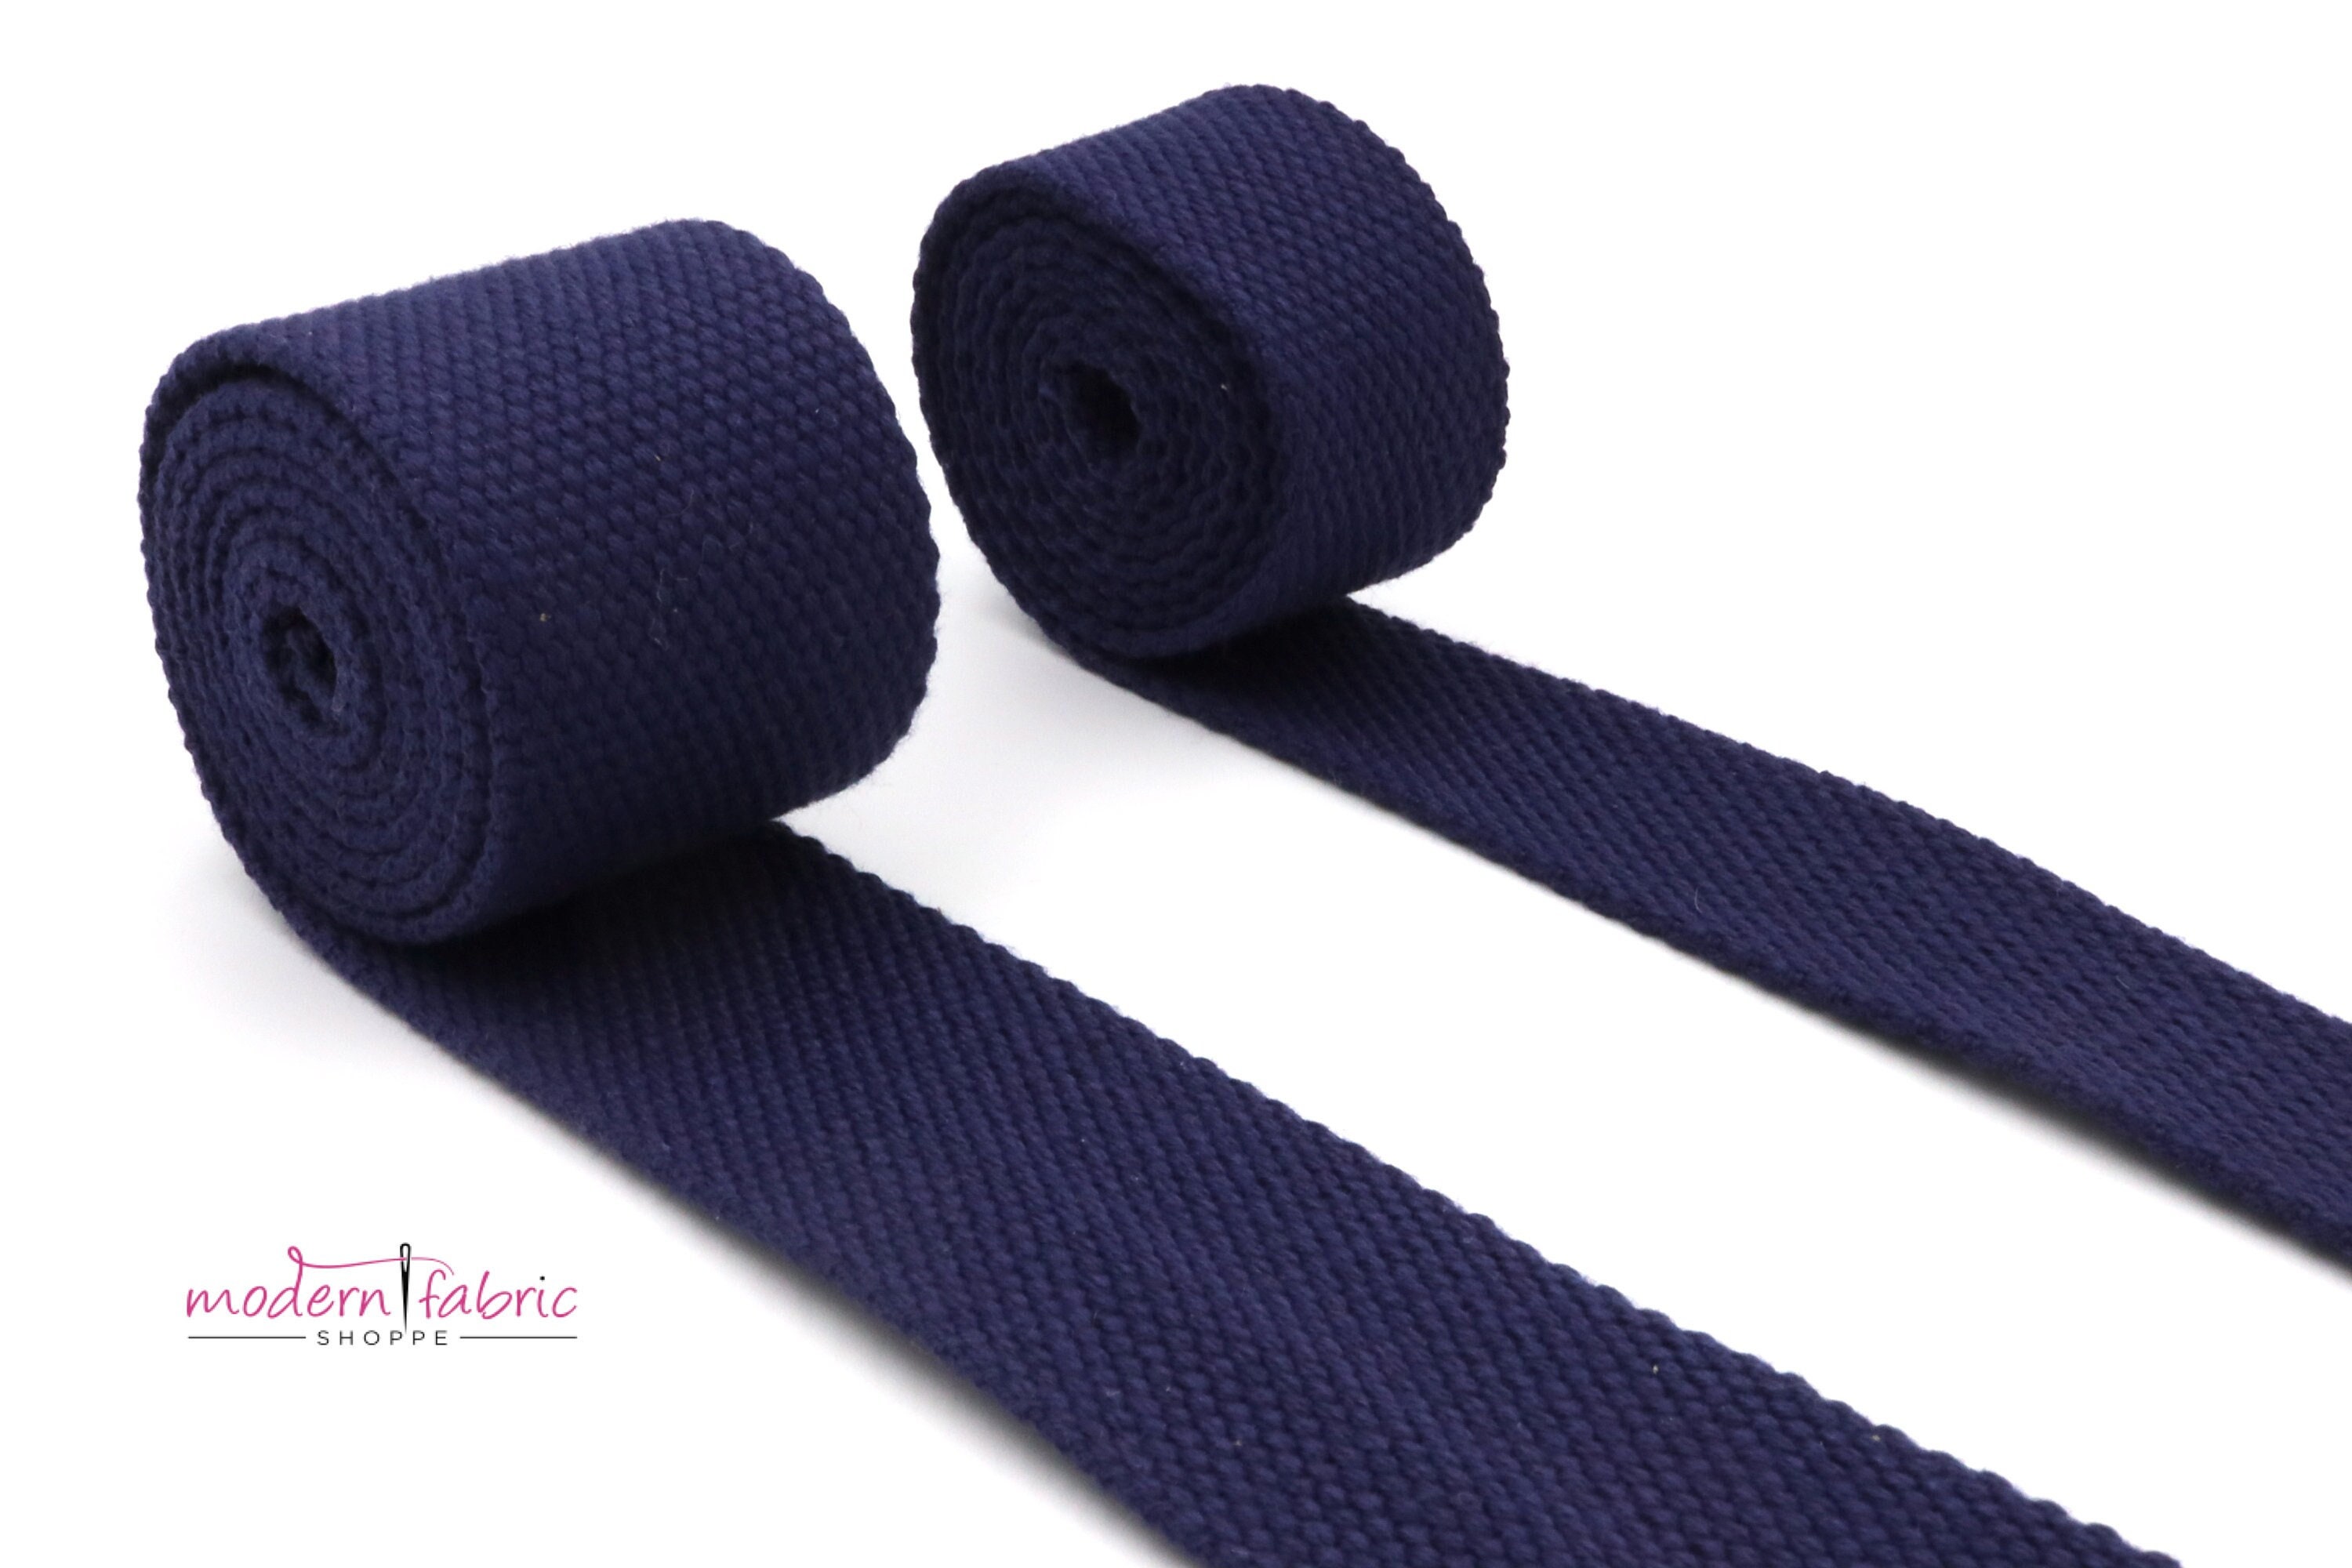 Custom Cotton Webbing 1.5 Inch Manufacturers and Suppliers - Free Sample in  Stock - Dyneema